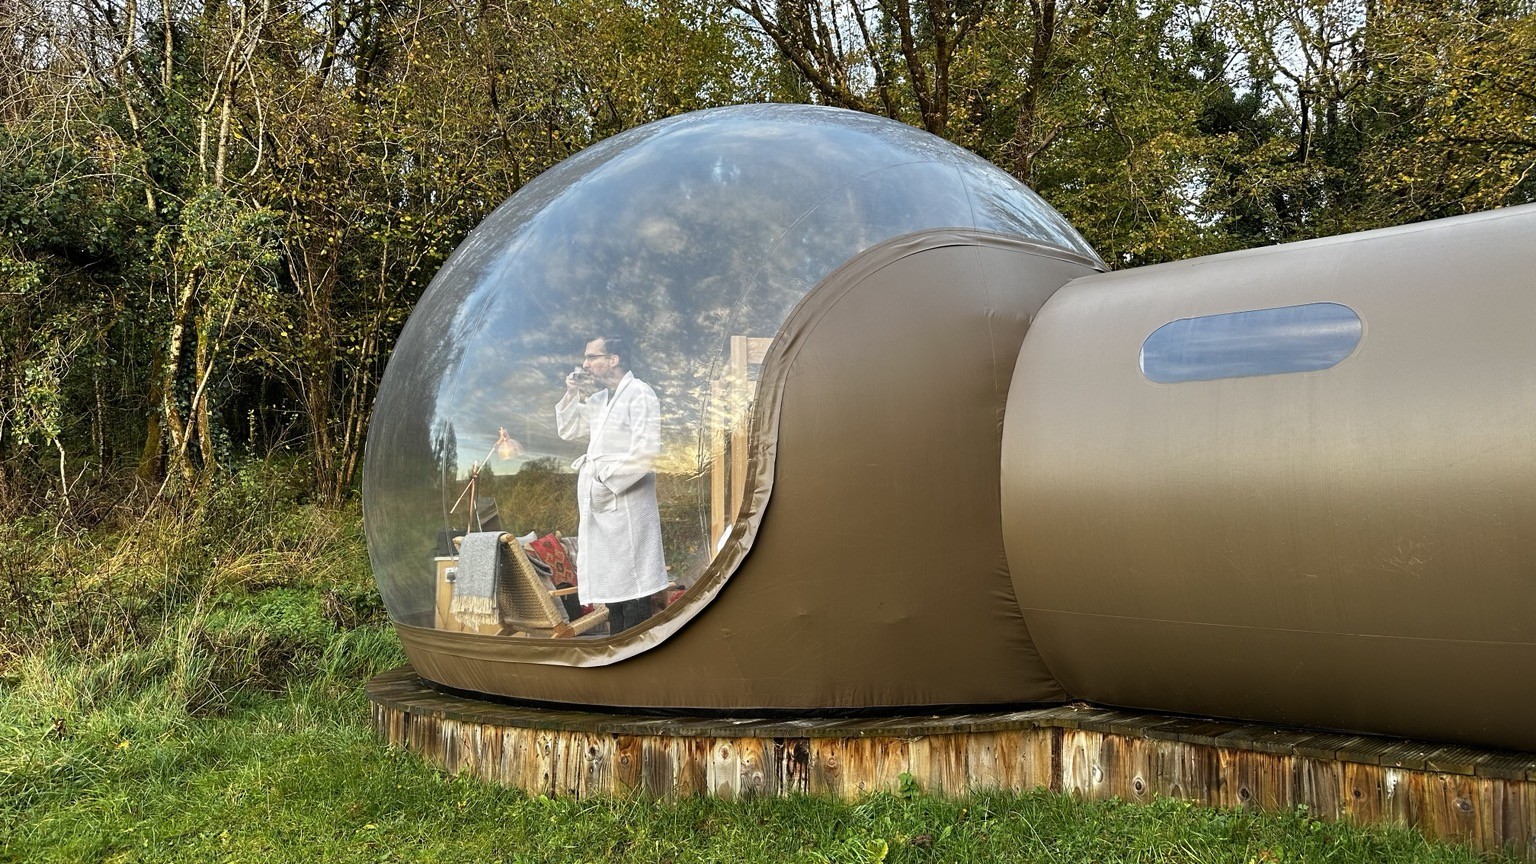 A man in a bathrobe, standing in an inflatable dome tent in the woods